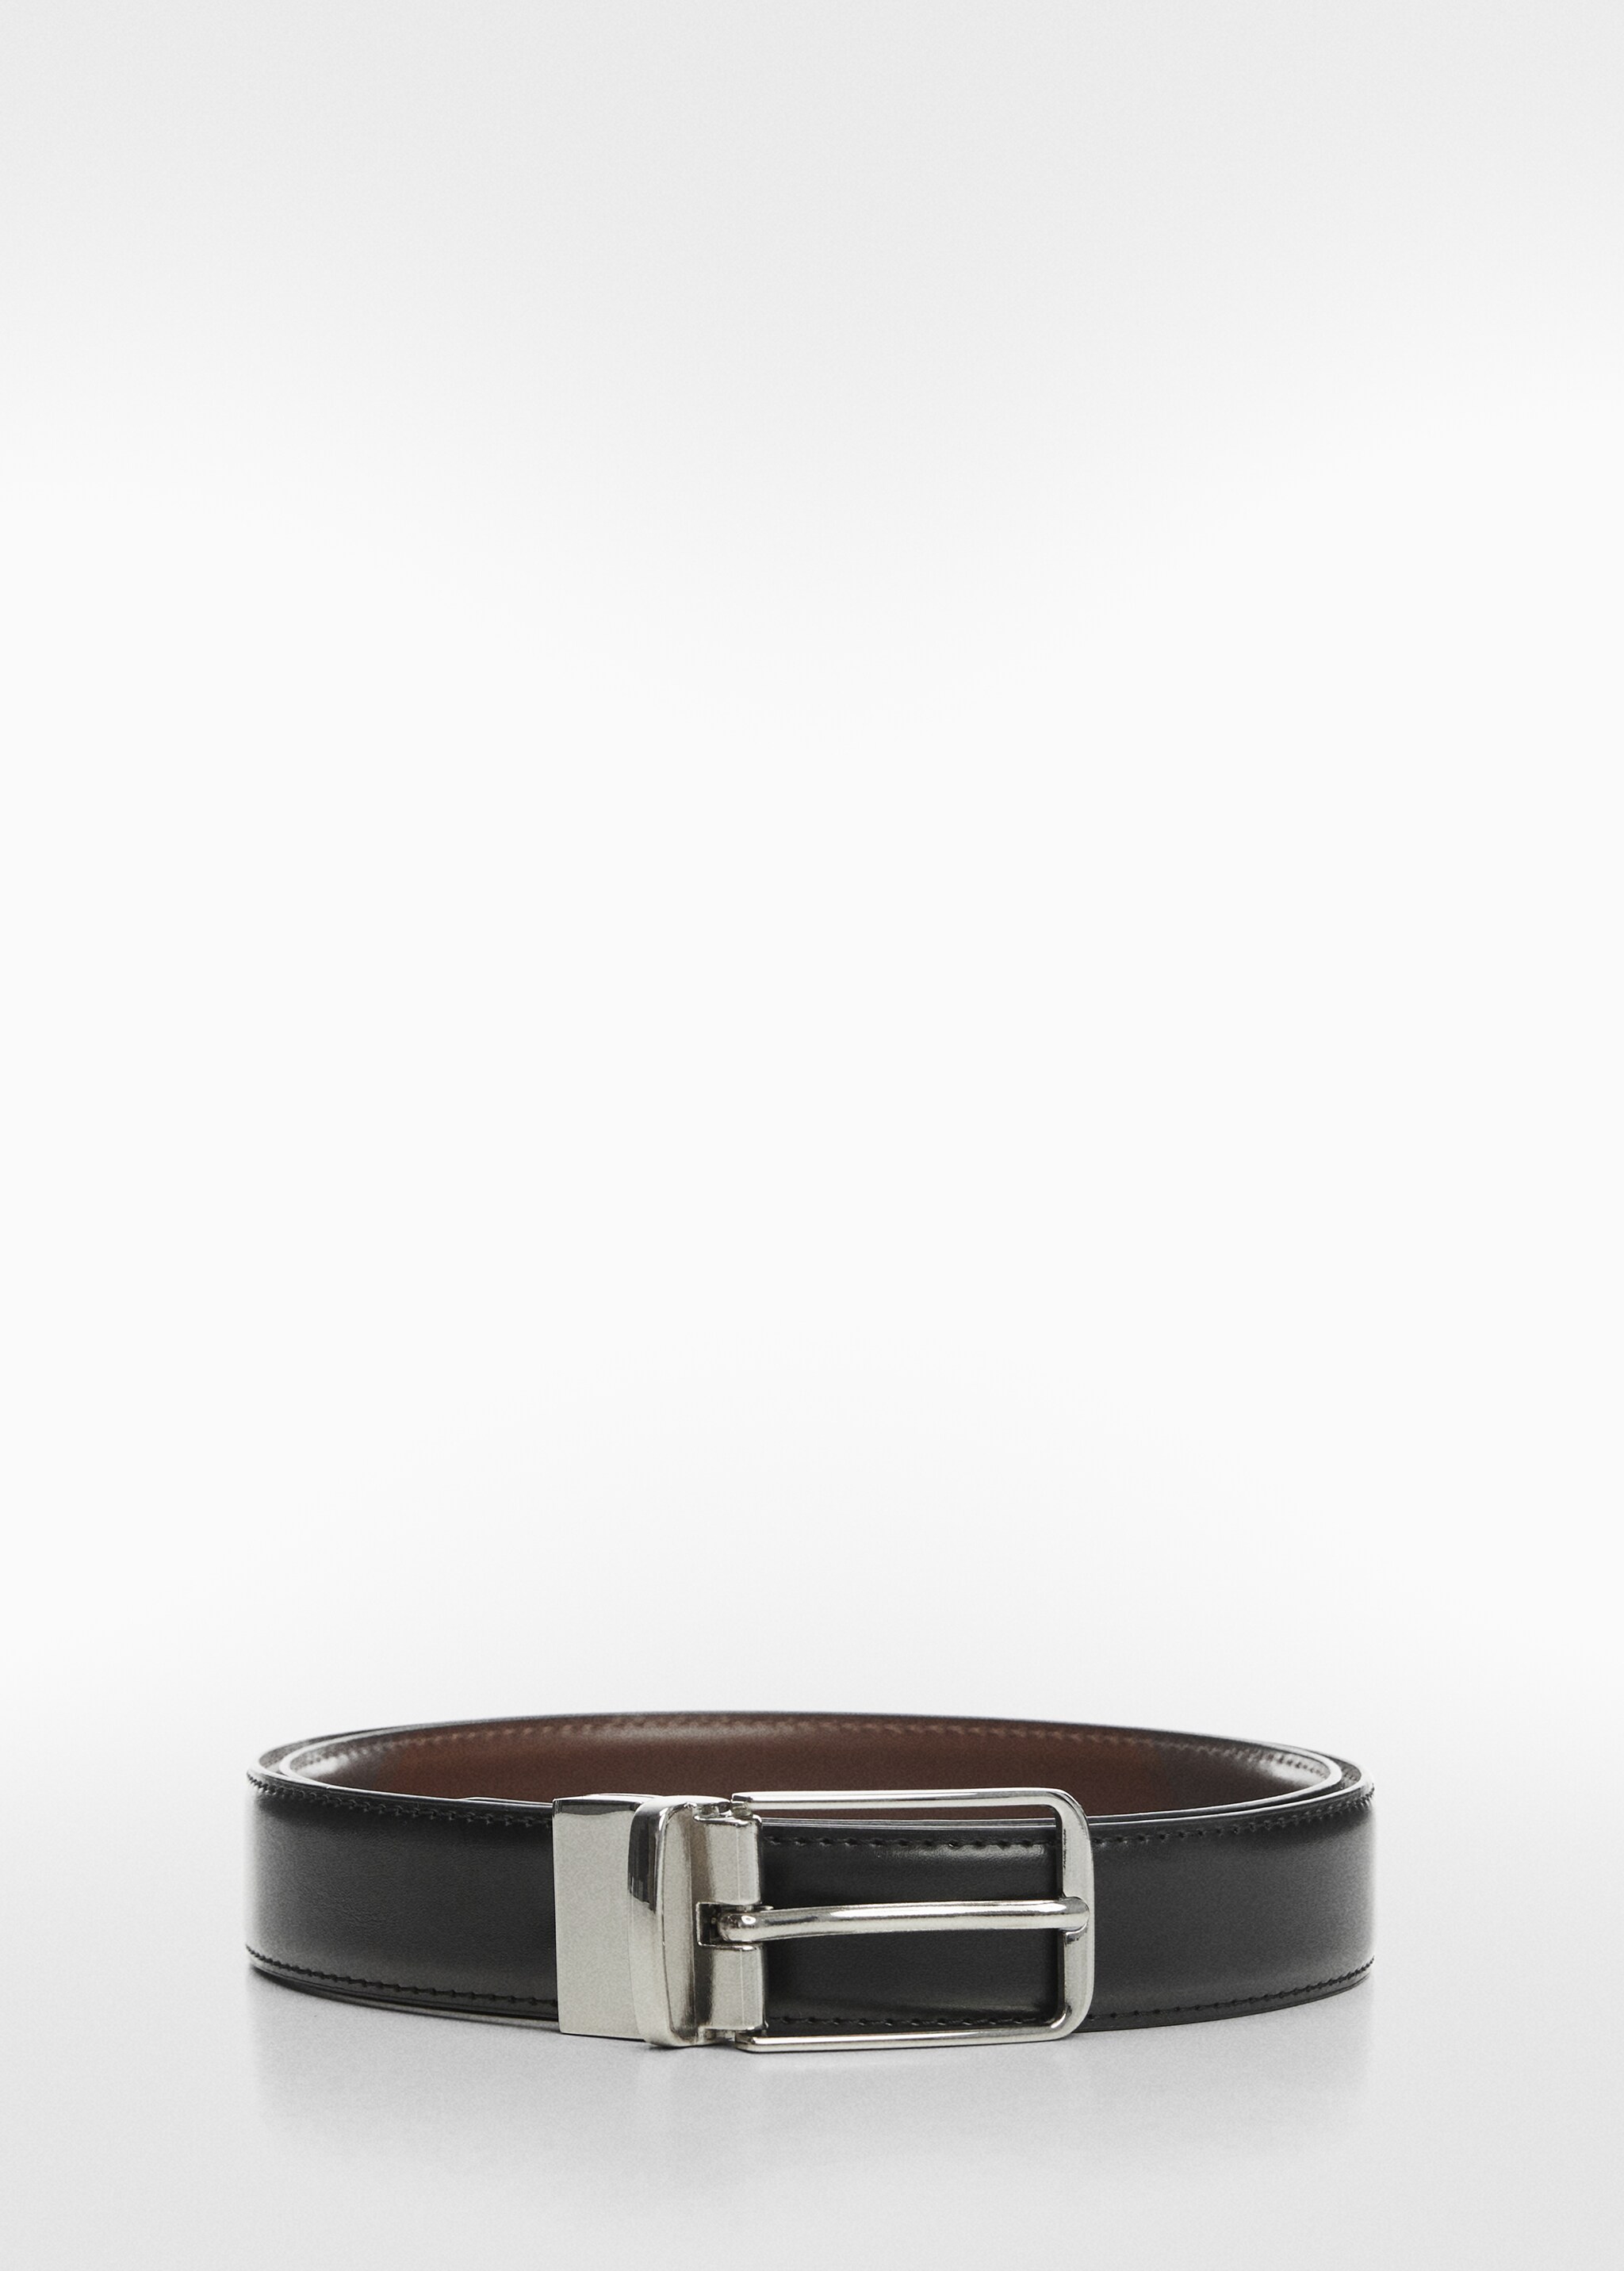 Leather reversible belt - Article without model